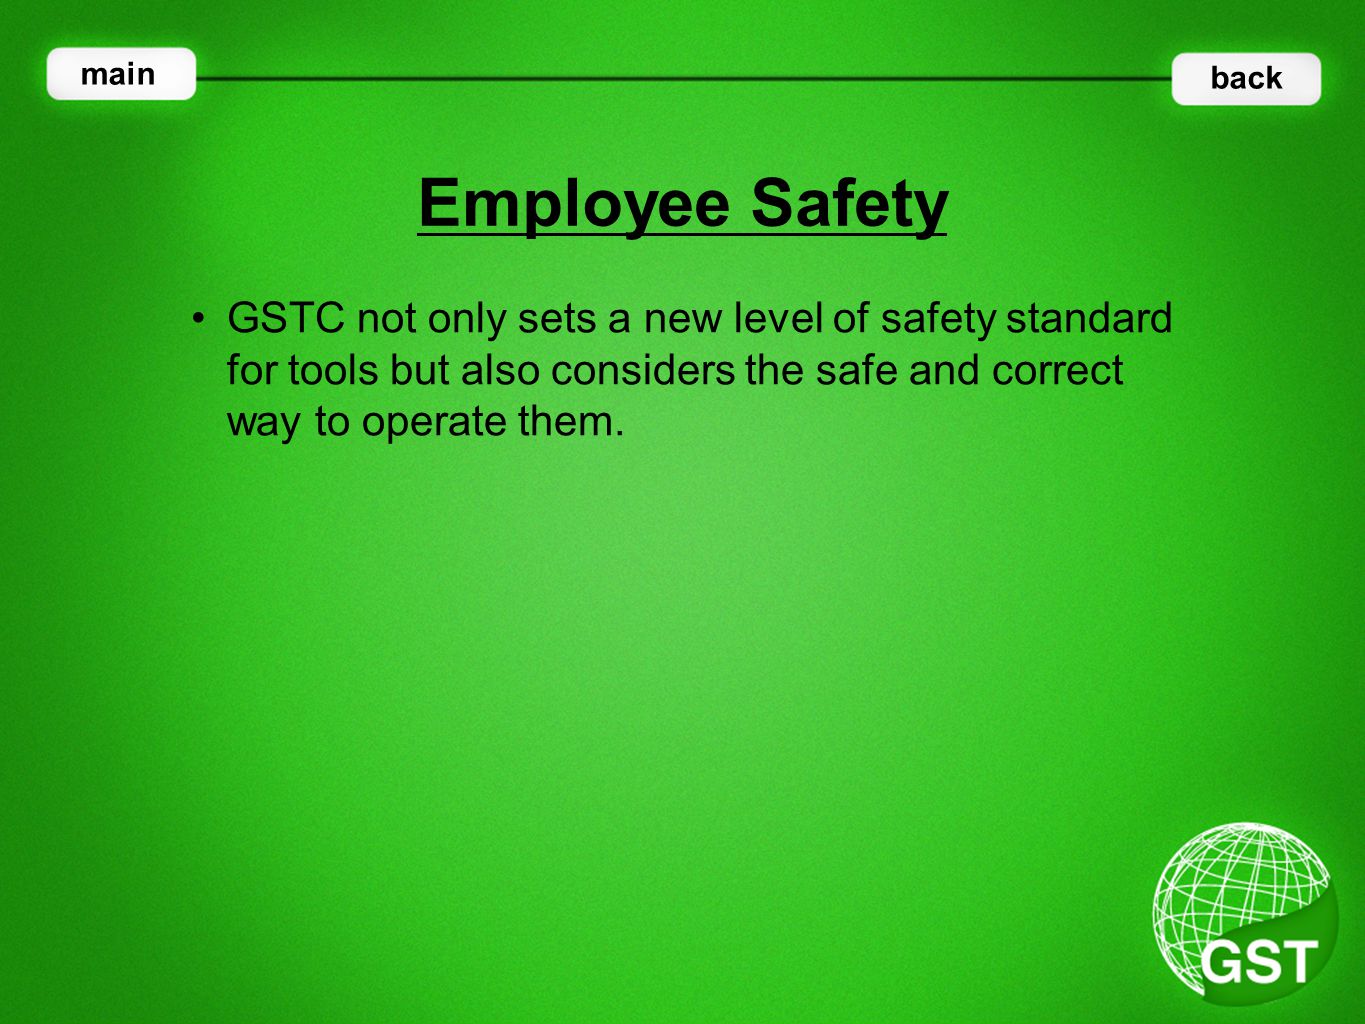 GSTC not only sets a new level of safety standard for tools but also considers the safe and correct way to operate them.